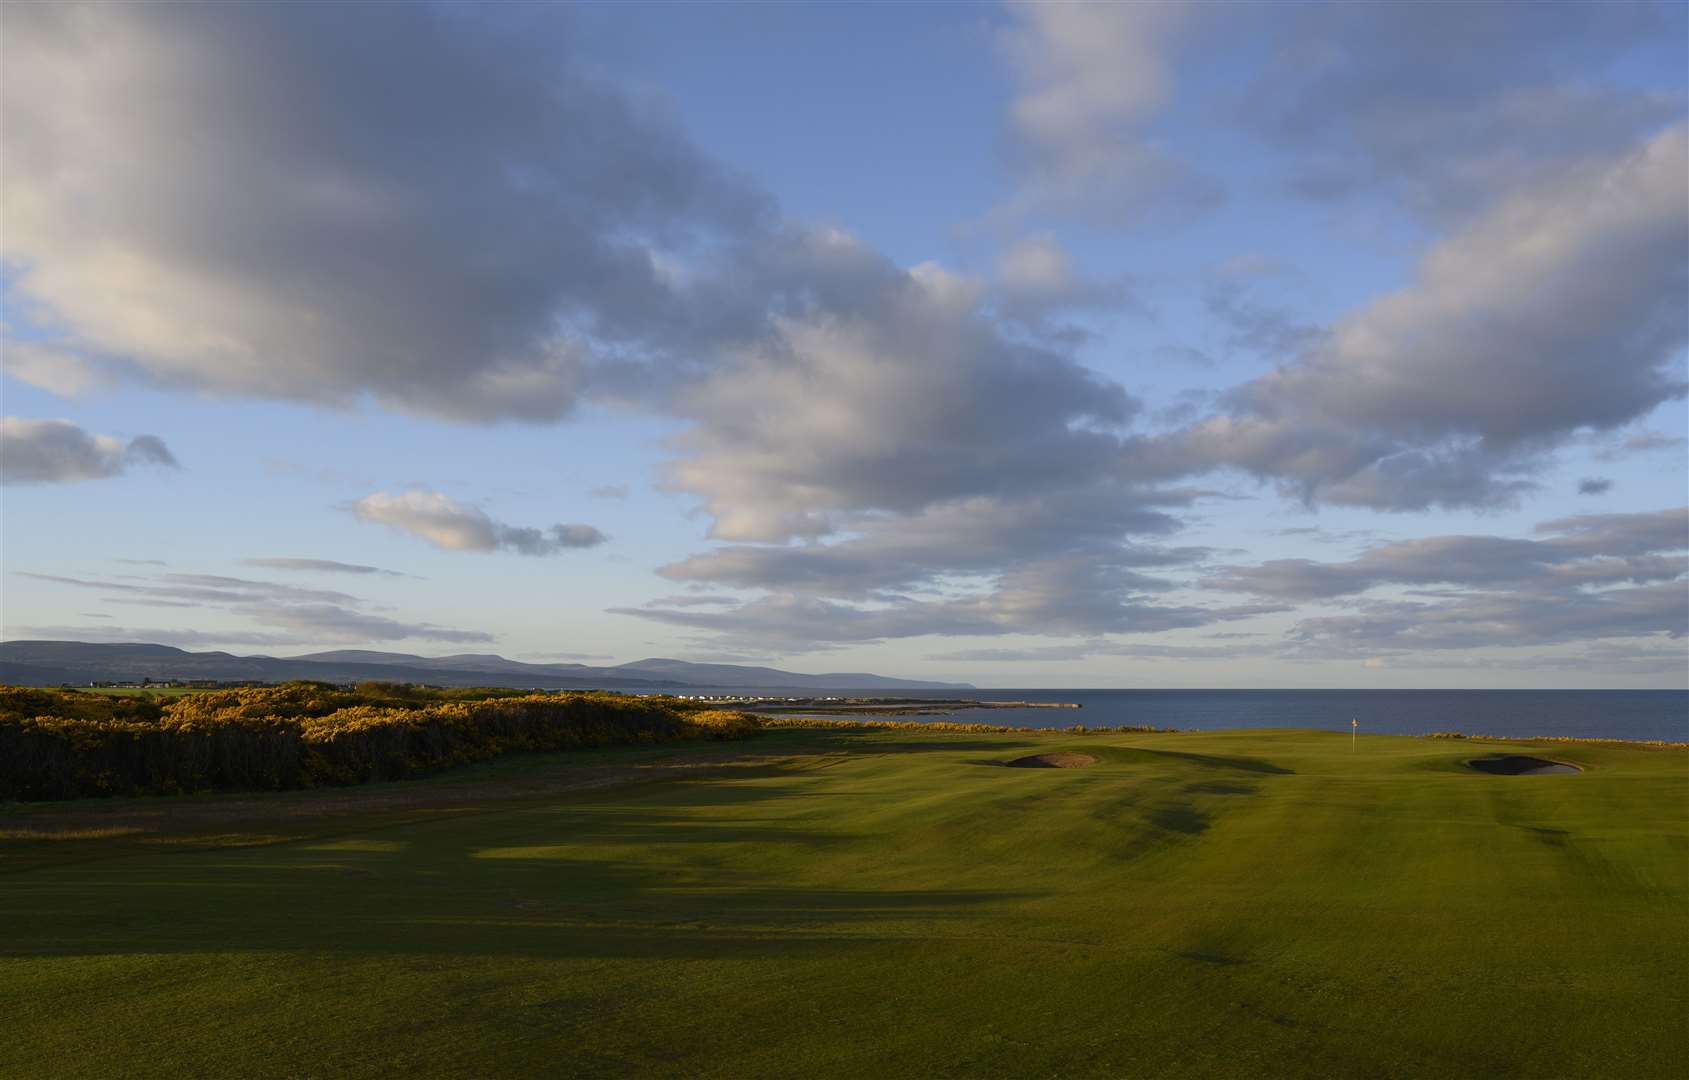 The 7th hole on the championship course at Royal Dornoch.